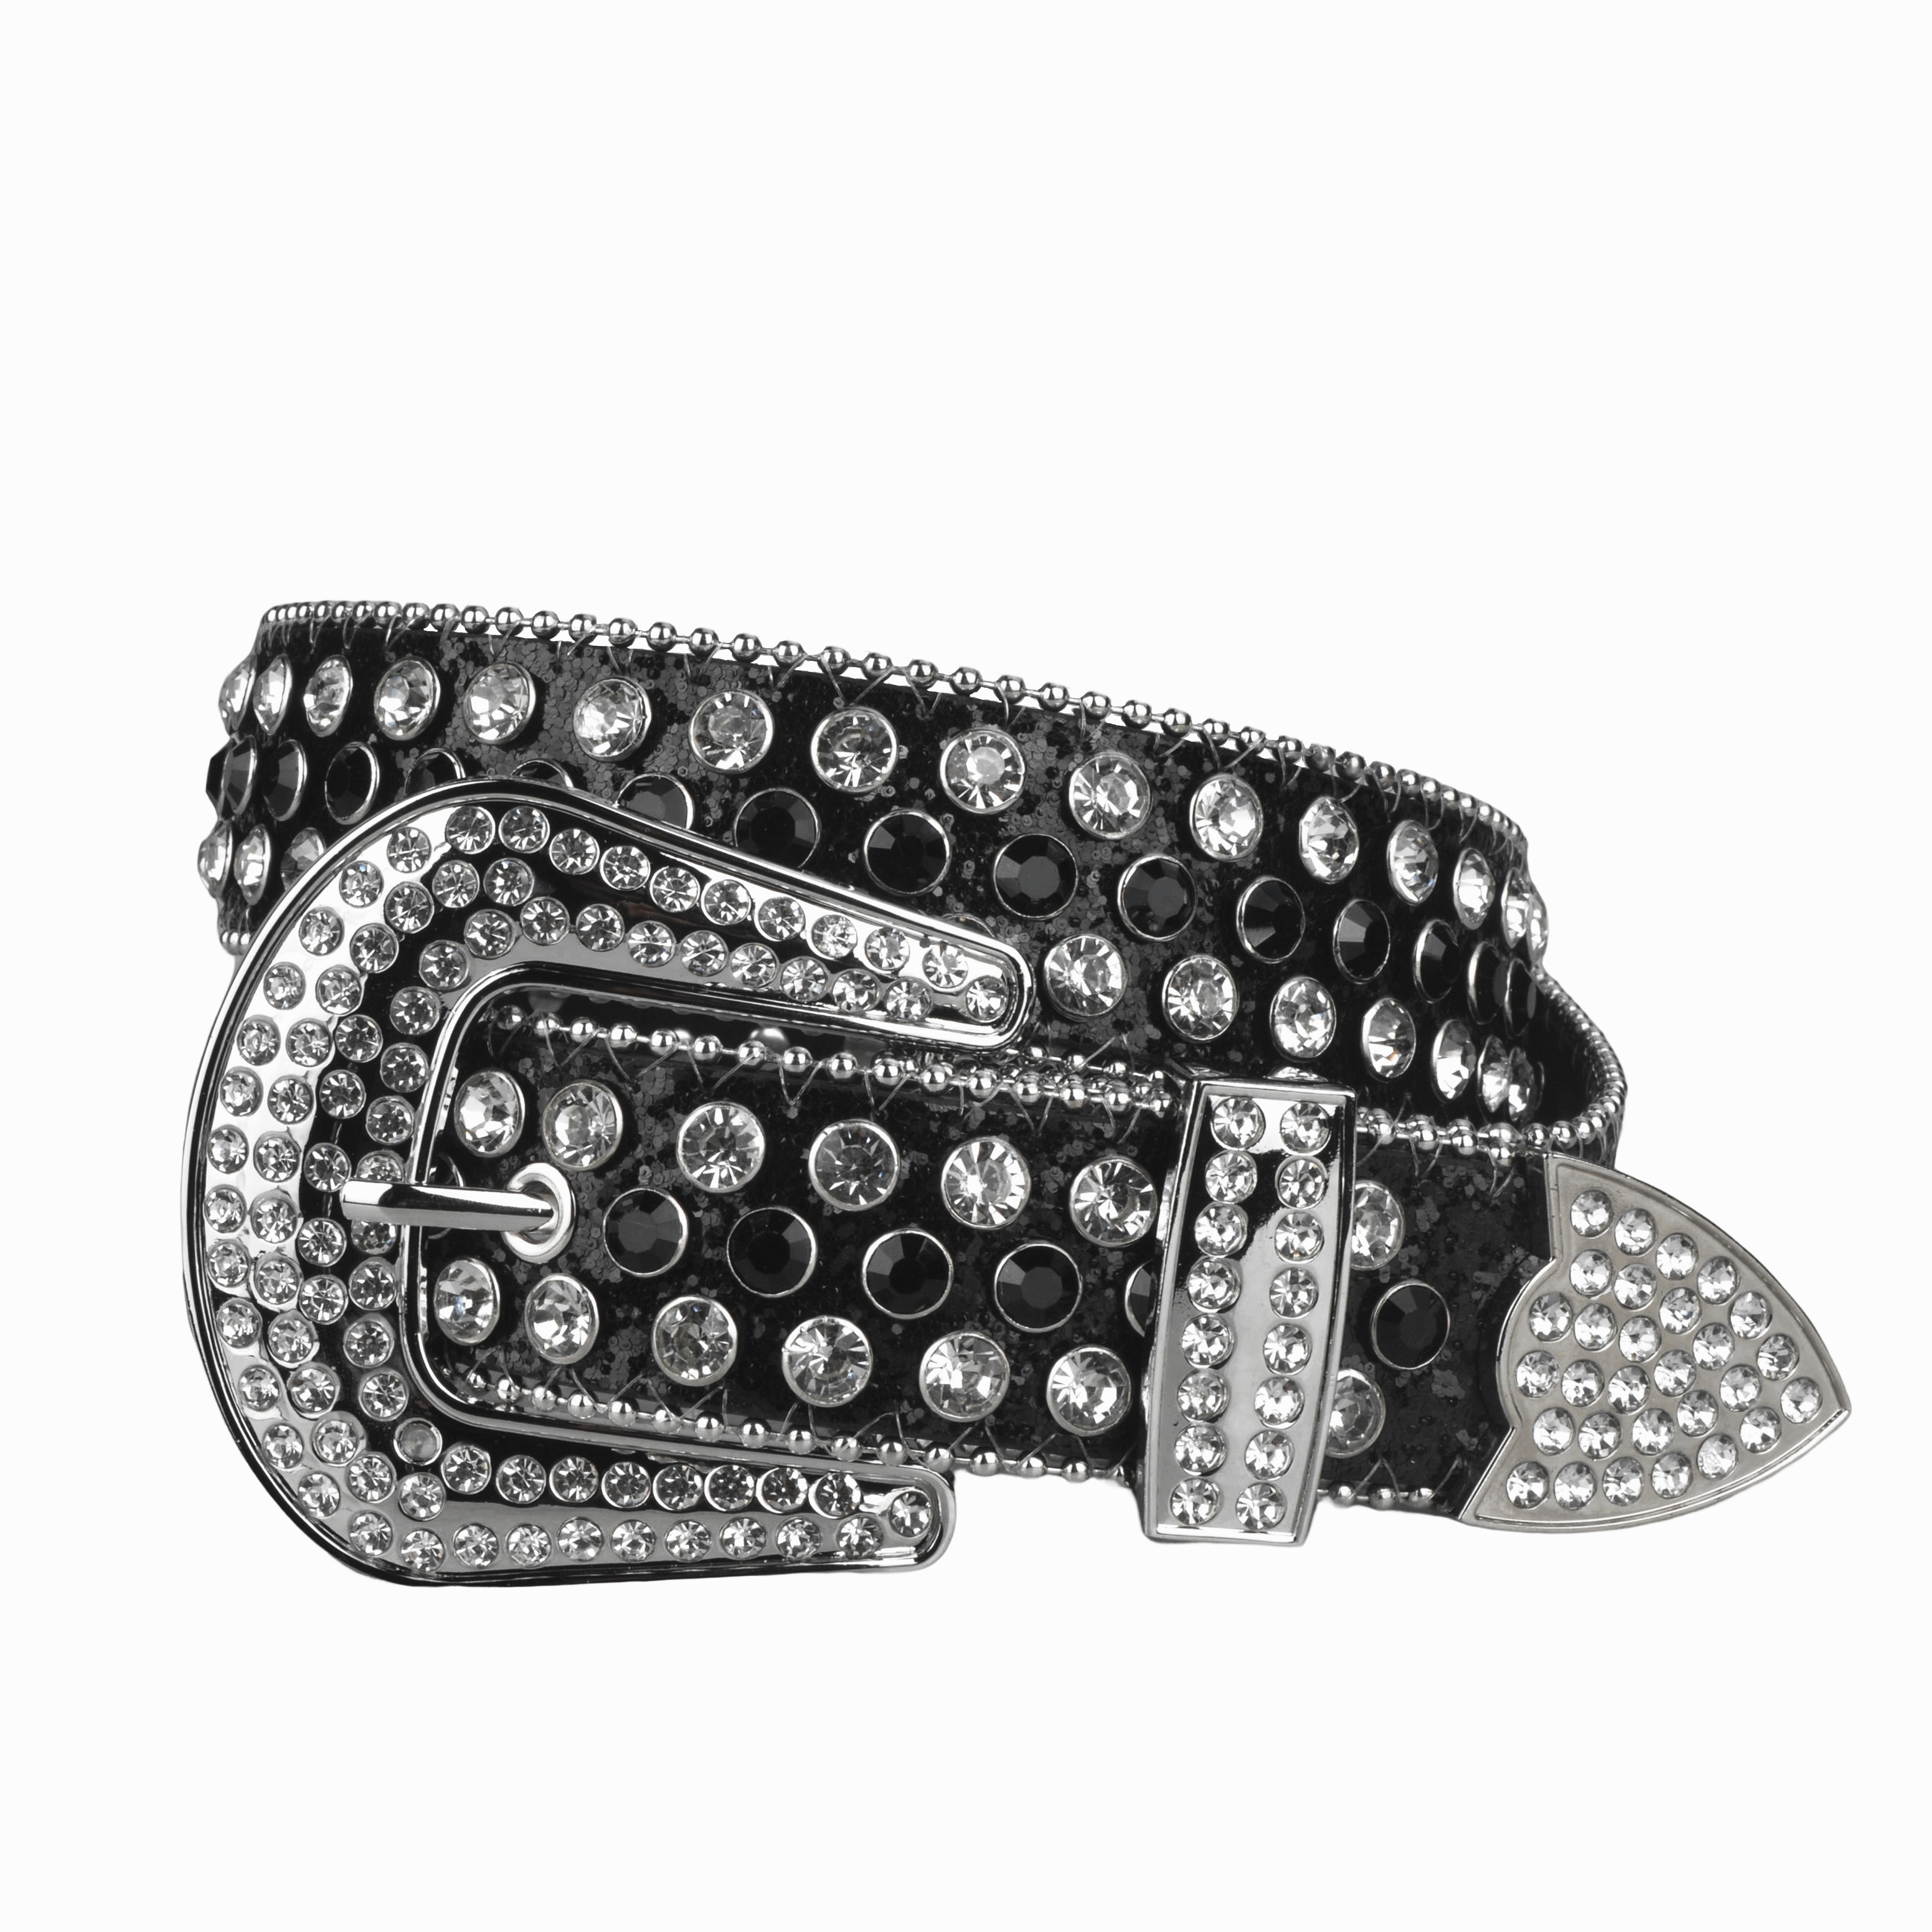 TB795 - Men's diamond woven stitched feather edge leather belt with br –  Toneka Lifestyle